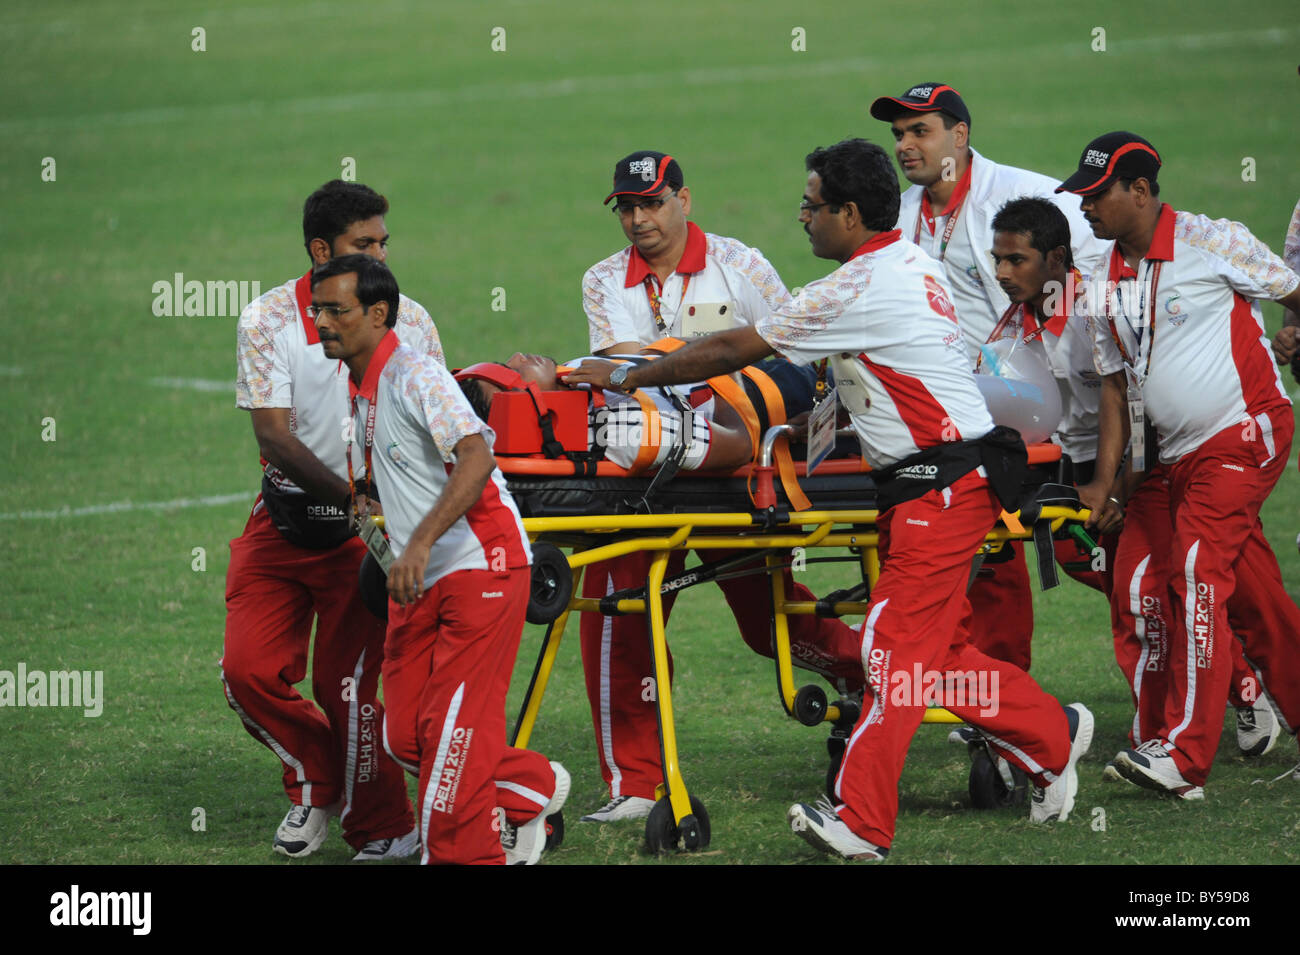 India Delhi 2010 XIX Commonwealth Games Rugby Sevens injured player being taken off the pitch on wheeled stretcher. Stock Photo